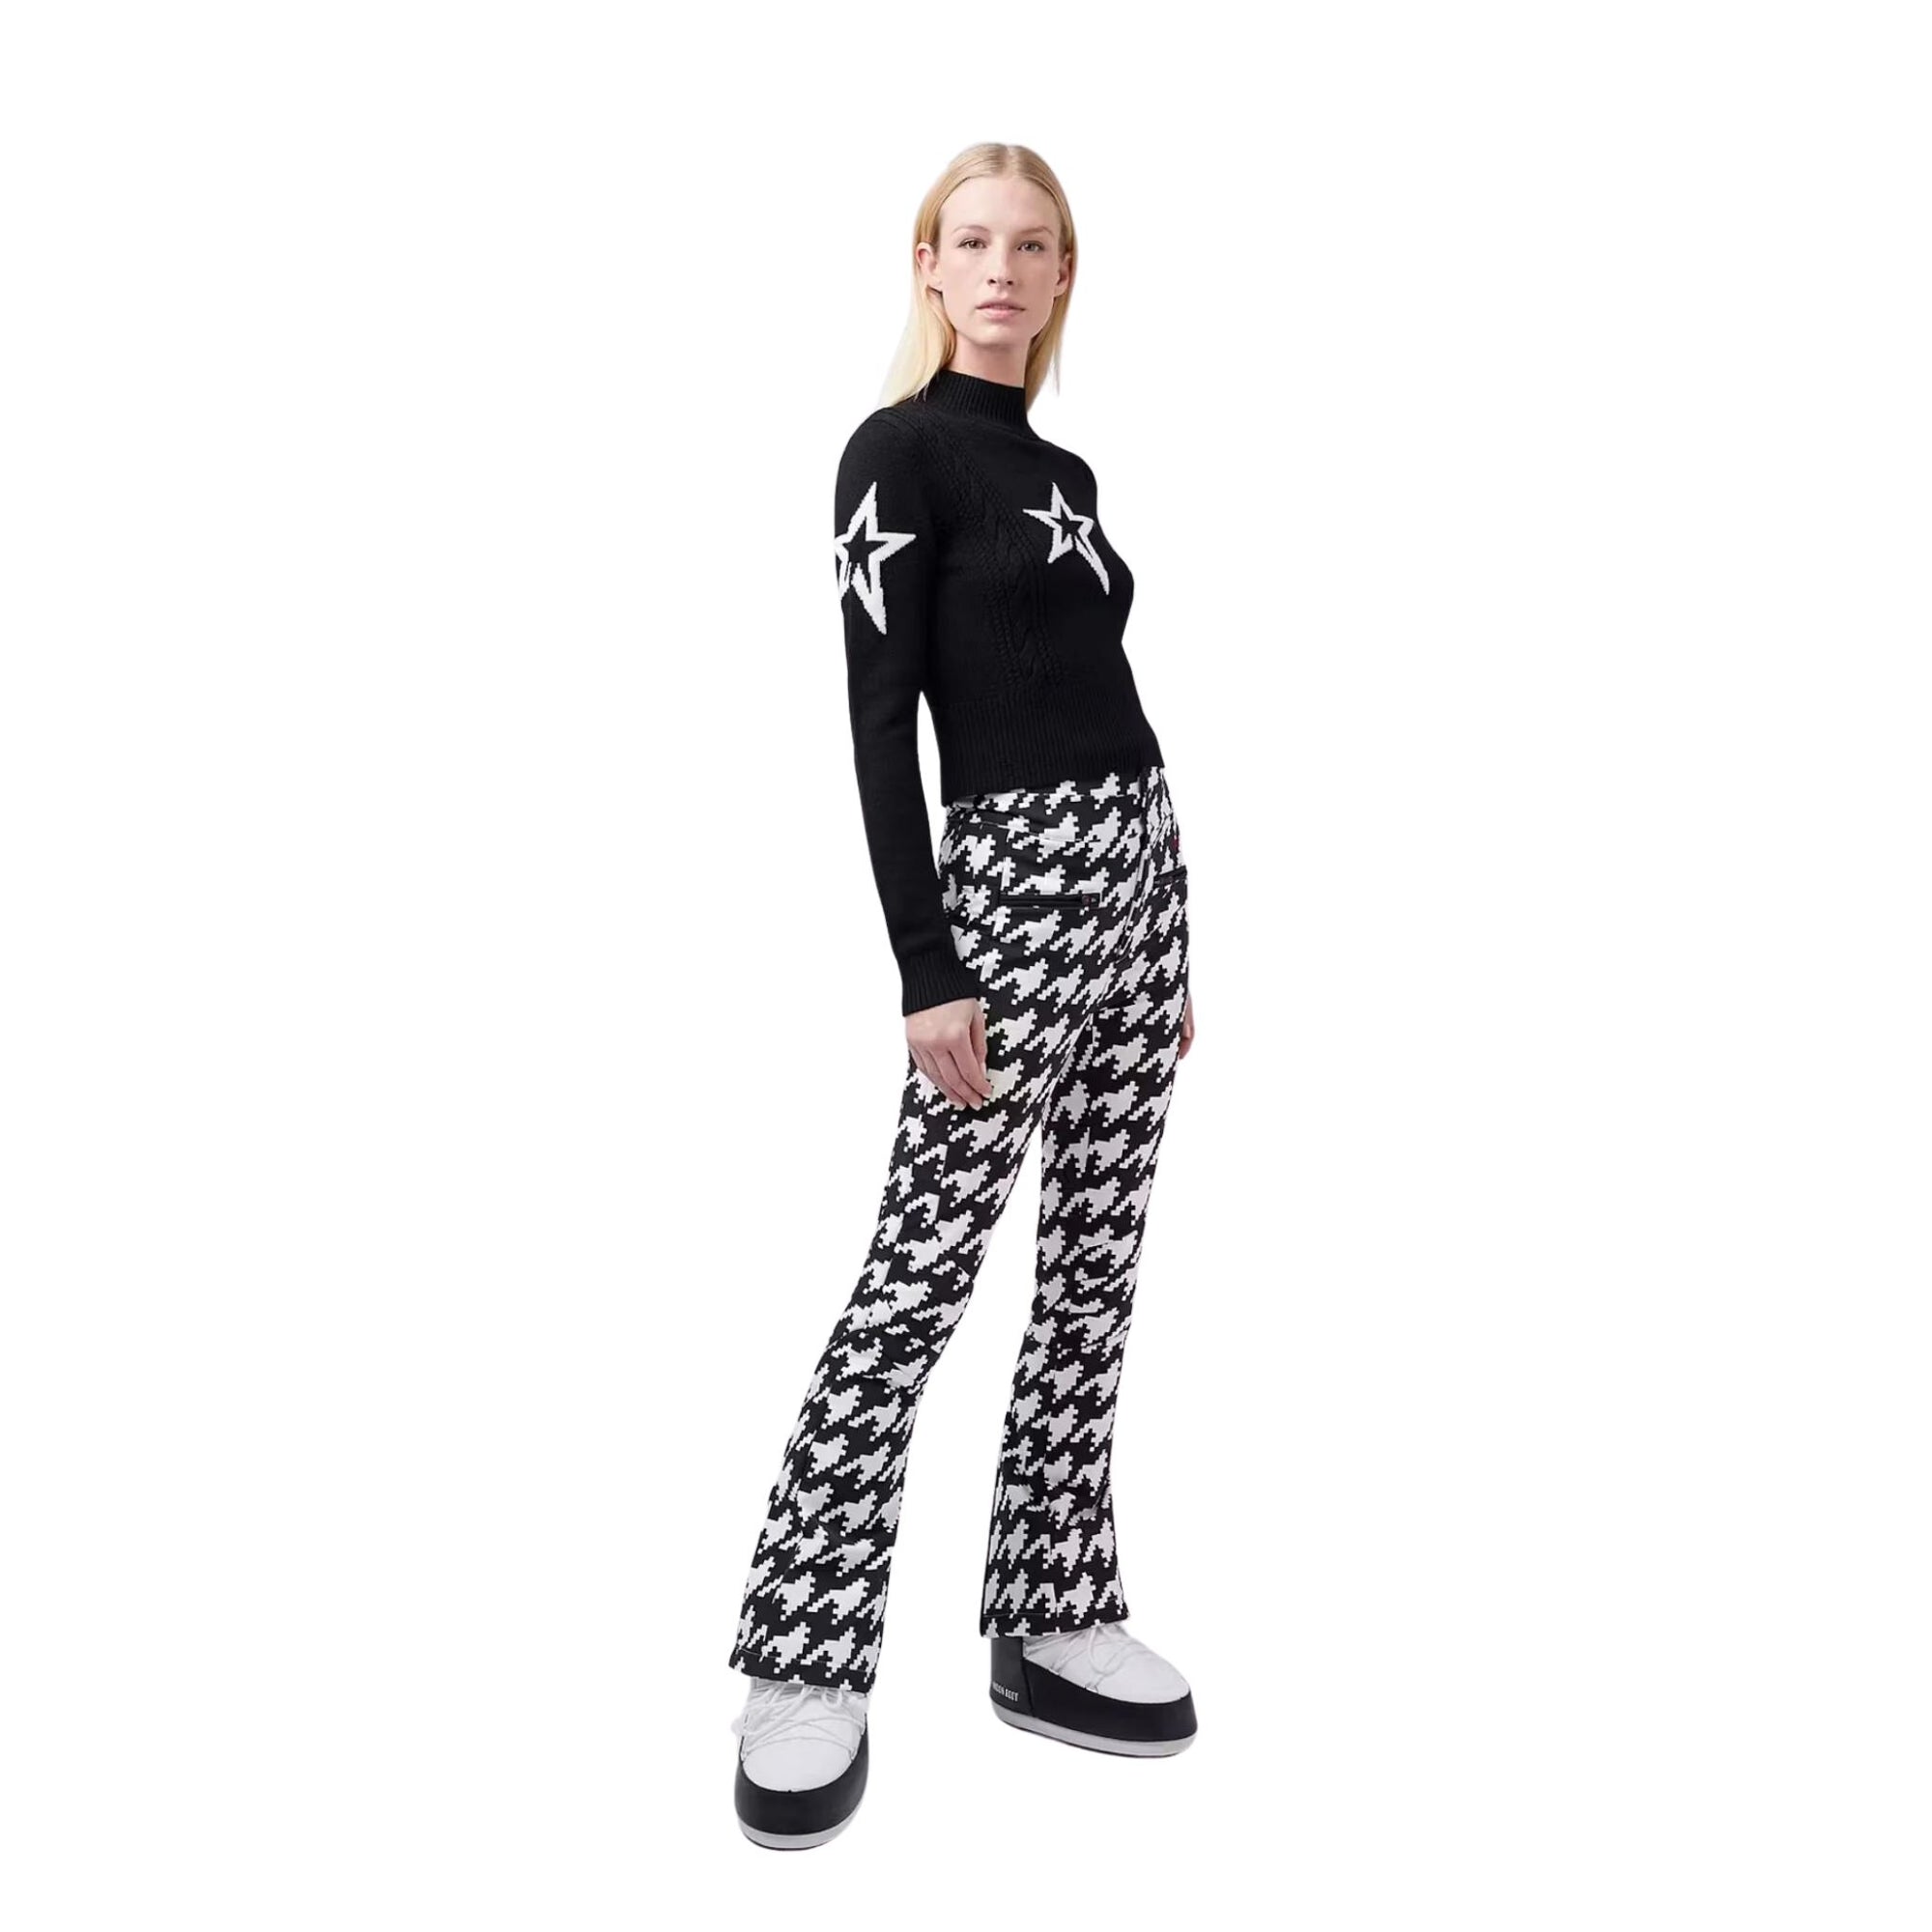 Womens Perfect Moment Aurora High Waist Flare Pant - Houndstooth Black/Snow White Pants Perfect Moment XS INTL / 6-8 AU 